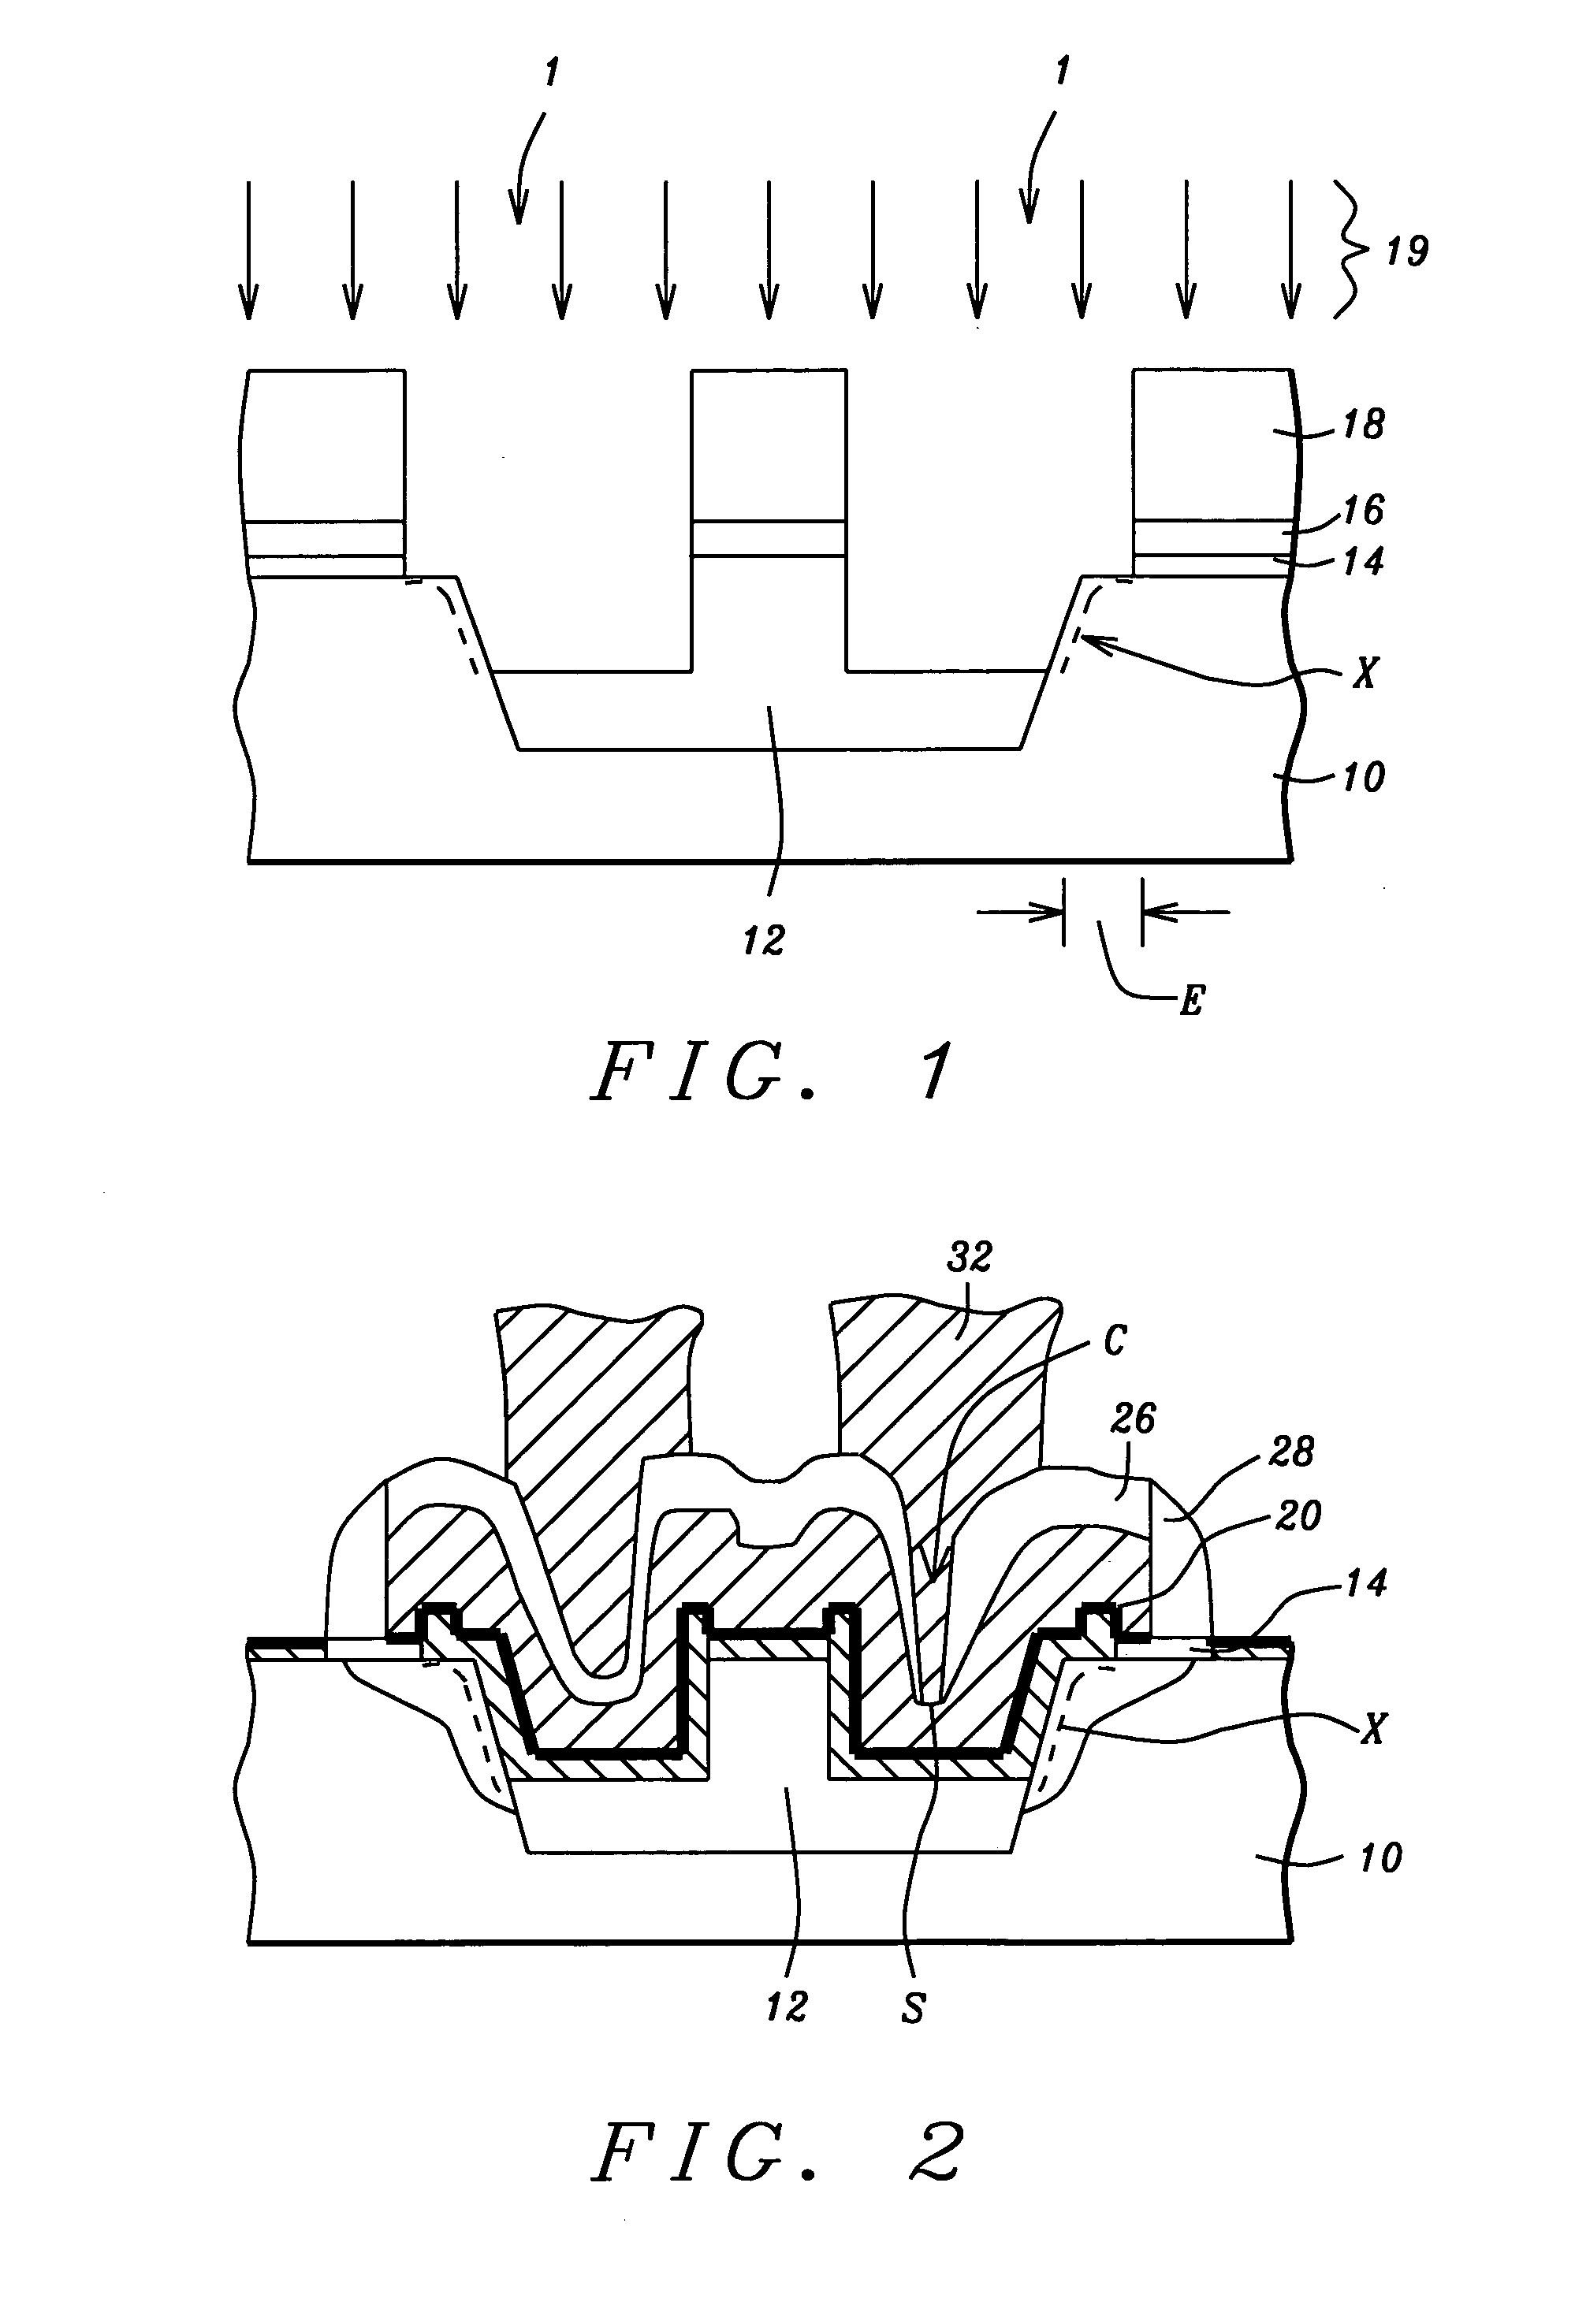 Novel random access memory (RAM) capacitor in shallow trench isolation with improved electrical isolation to overlying gate electrodes